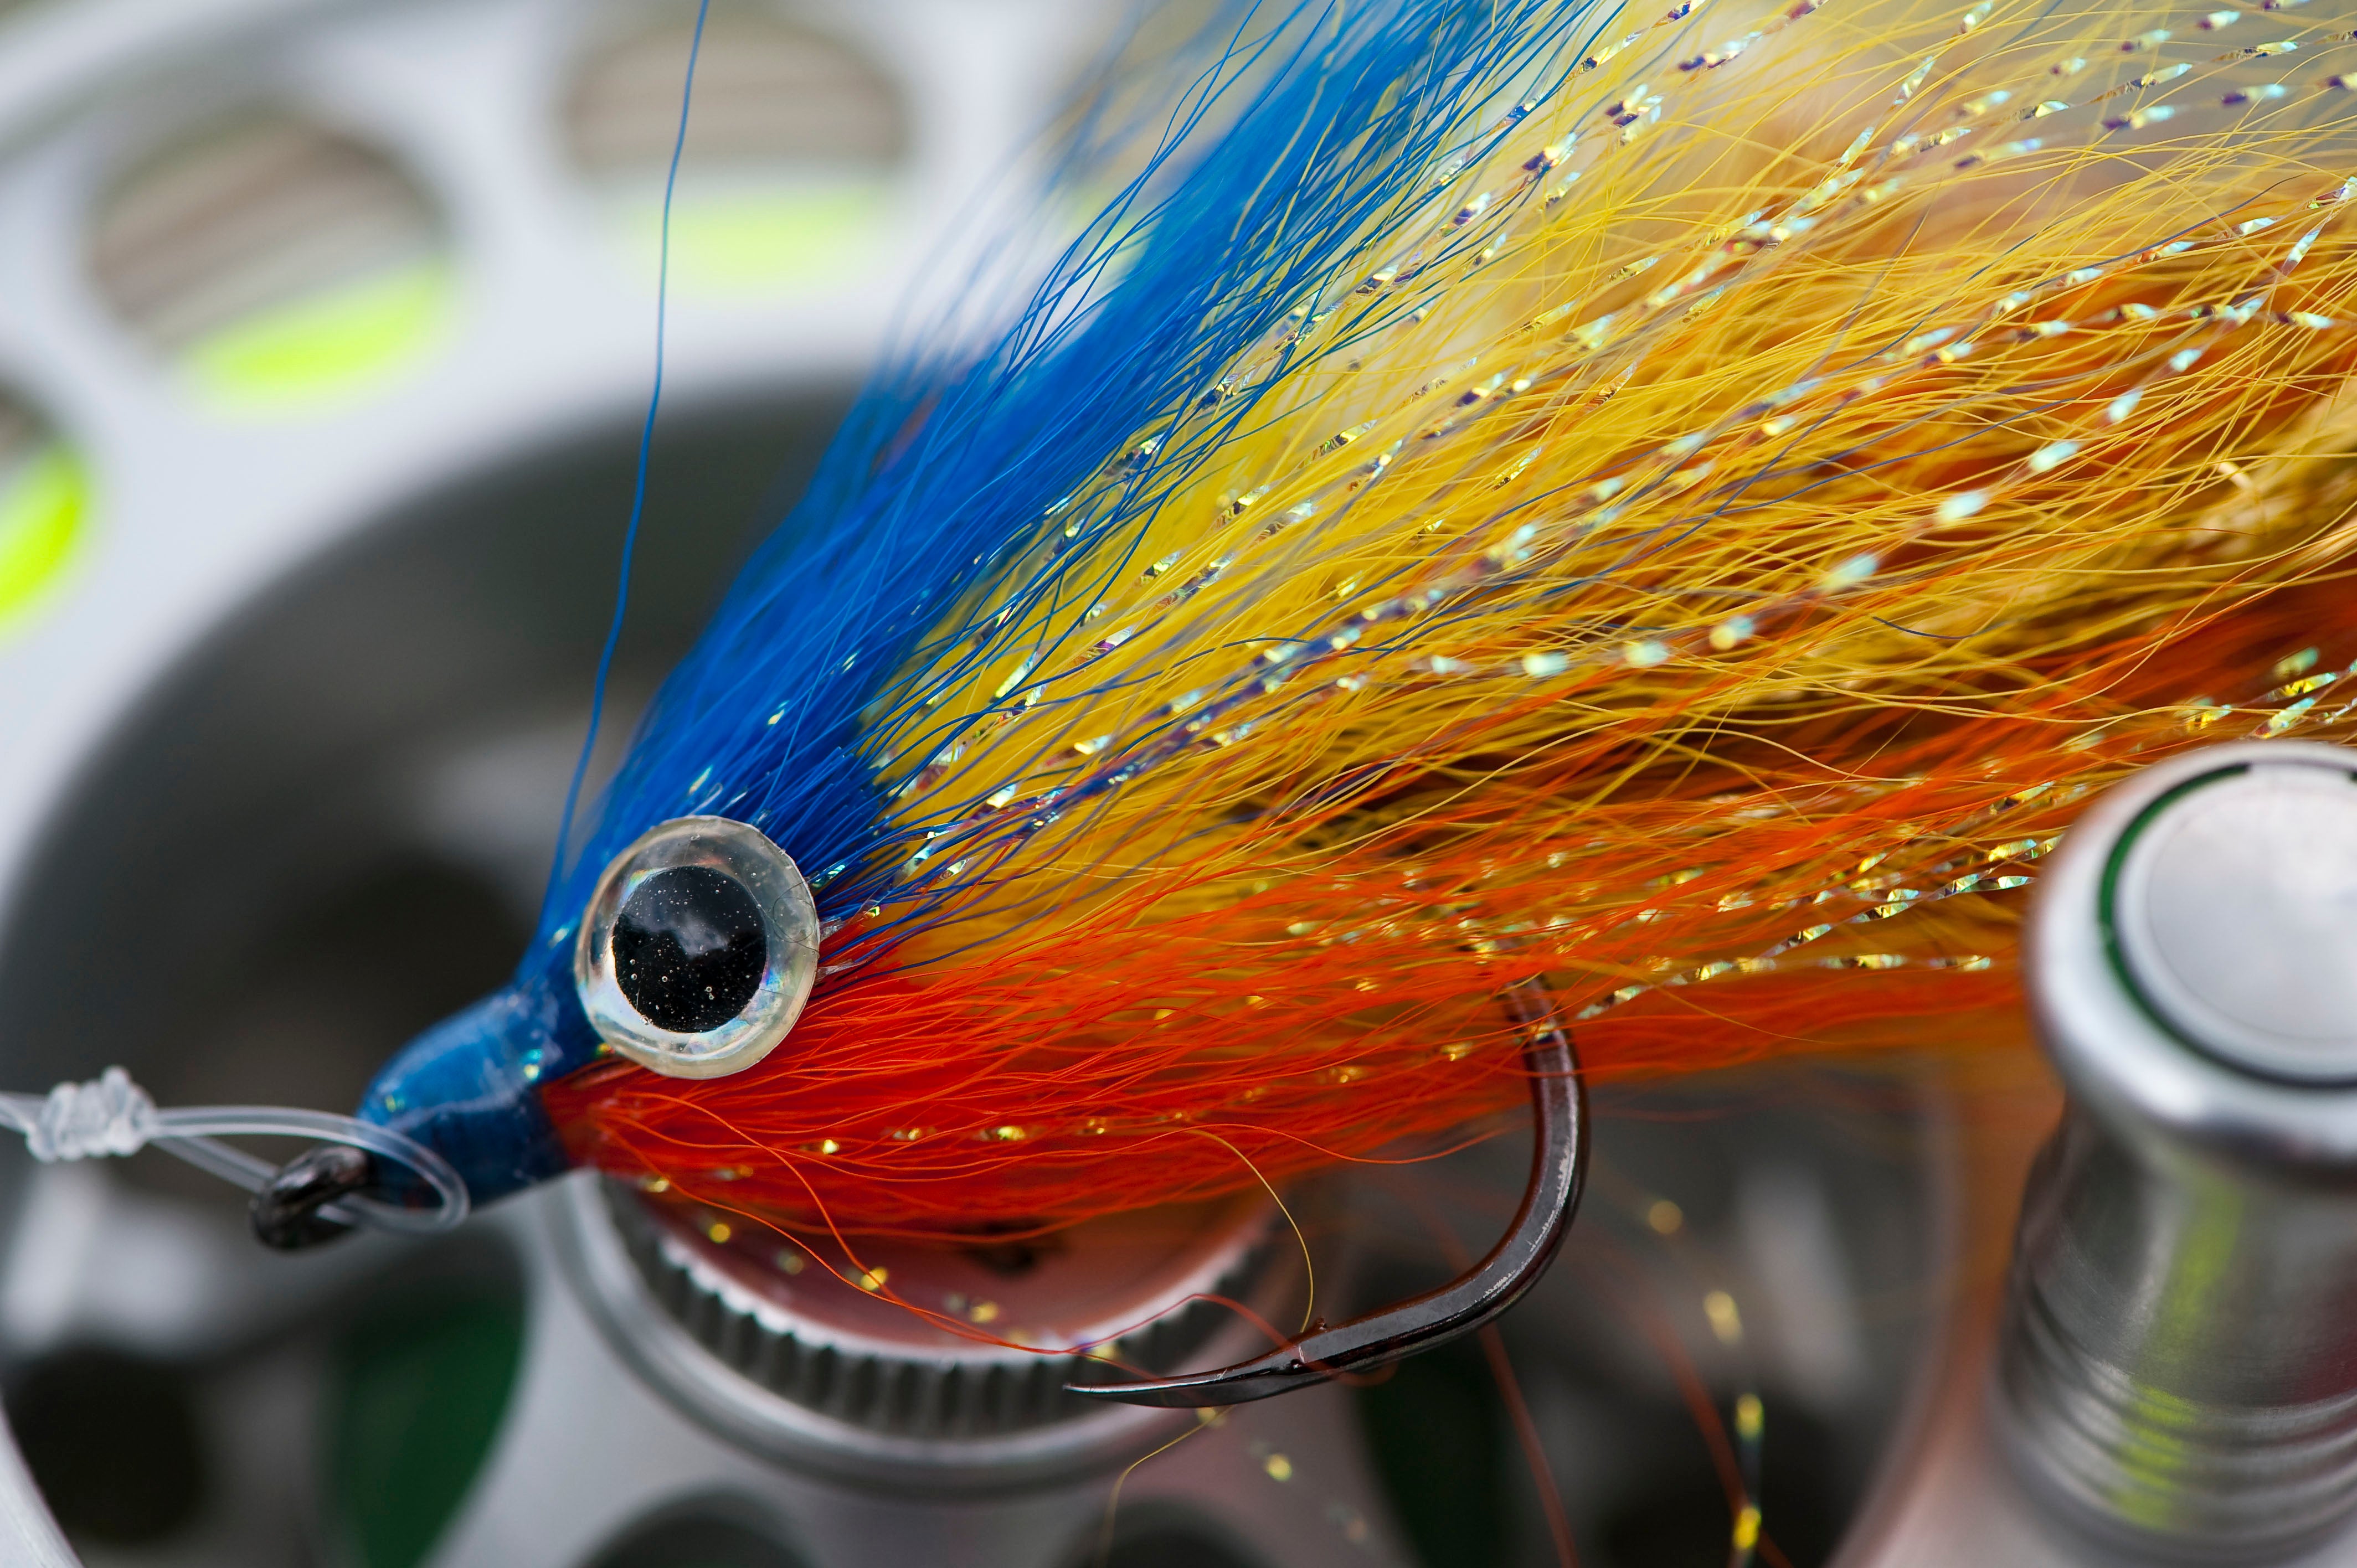 Streamer Flies - Sinking or Floating? How About Catching!